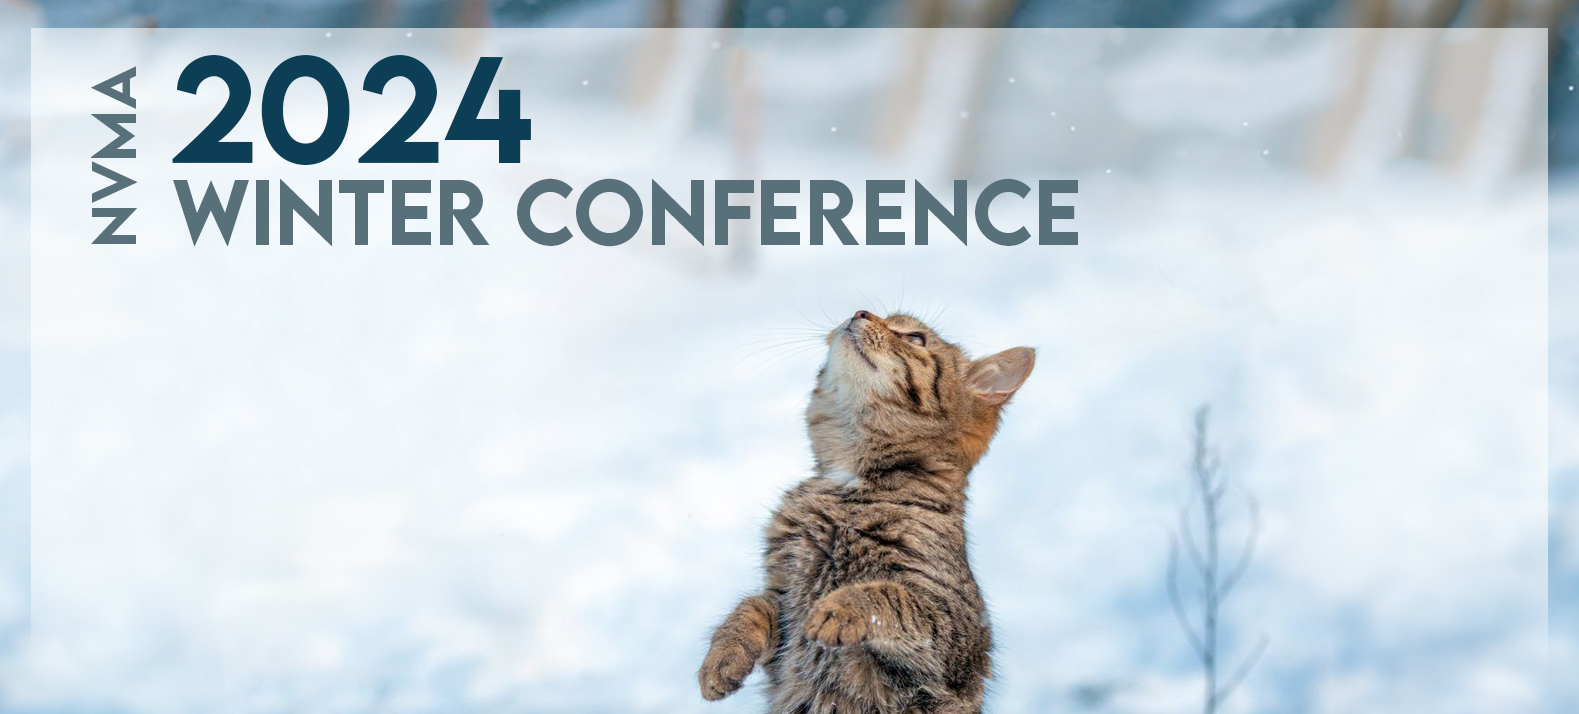 Winter Conference